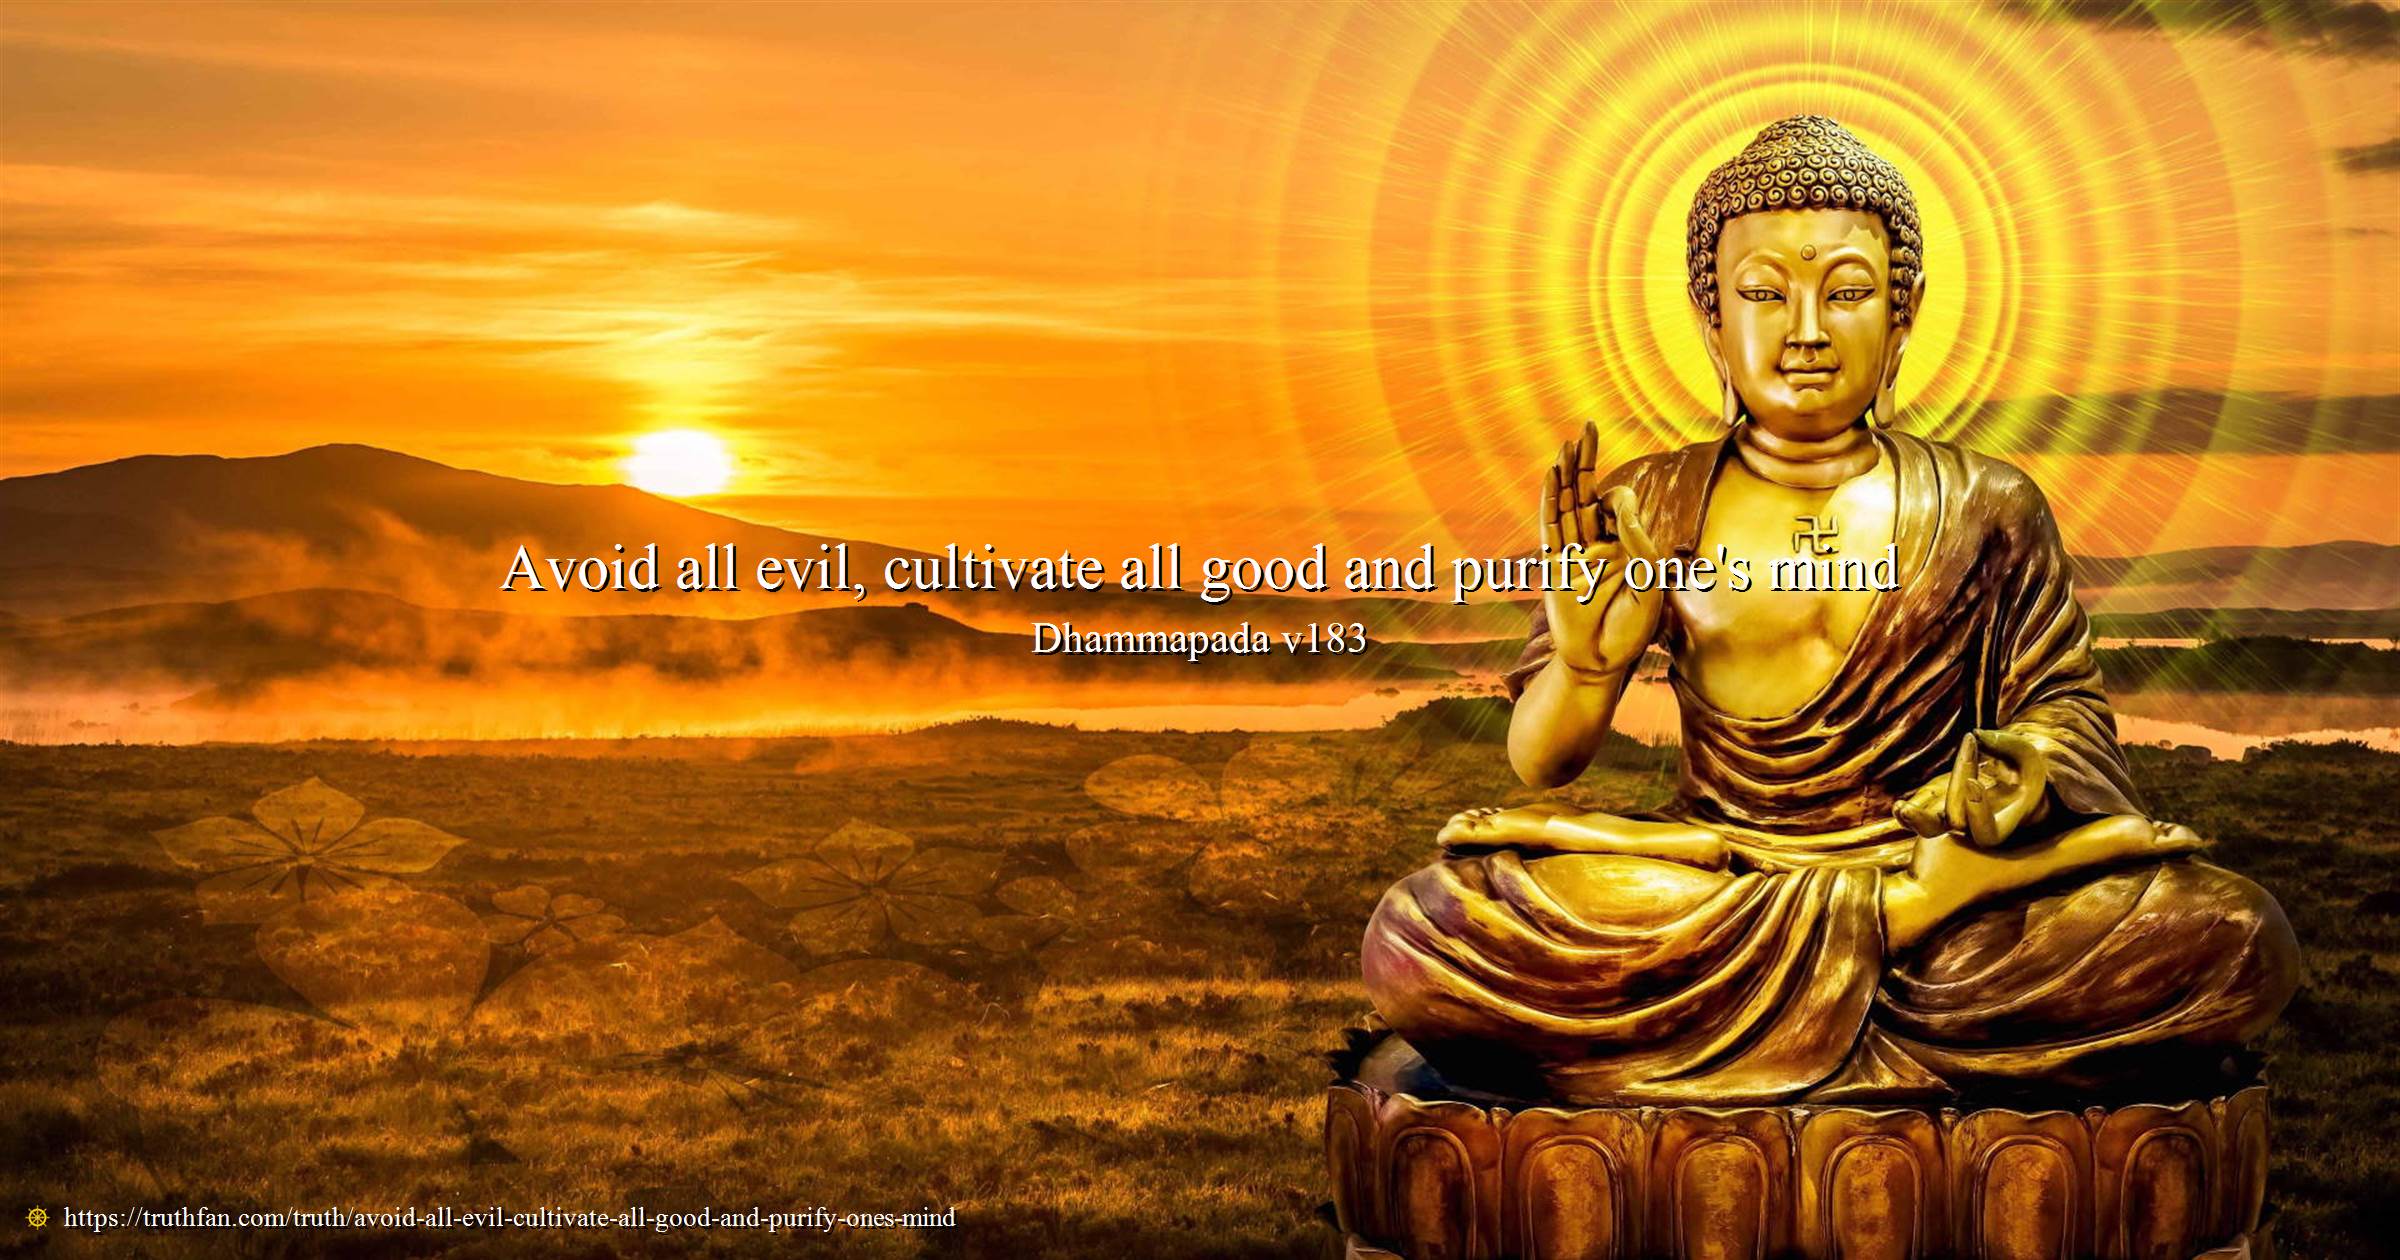 Avoid all evil, cultivate all good and purify one's mind - Truthfan.com